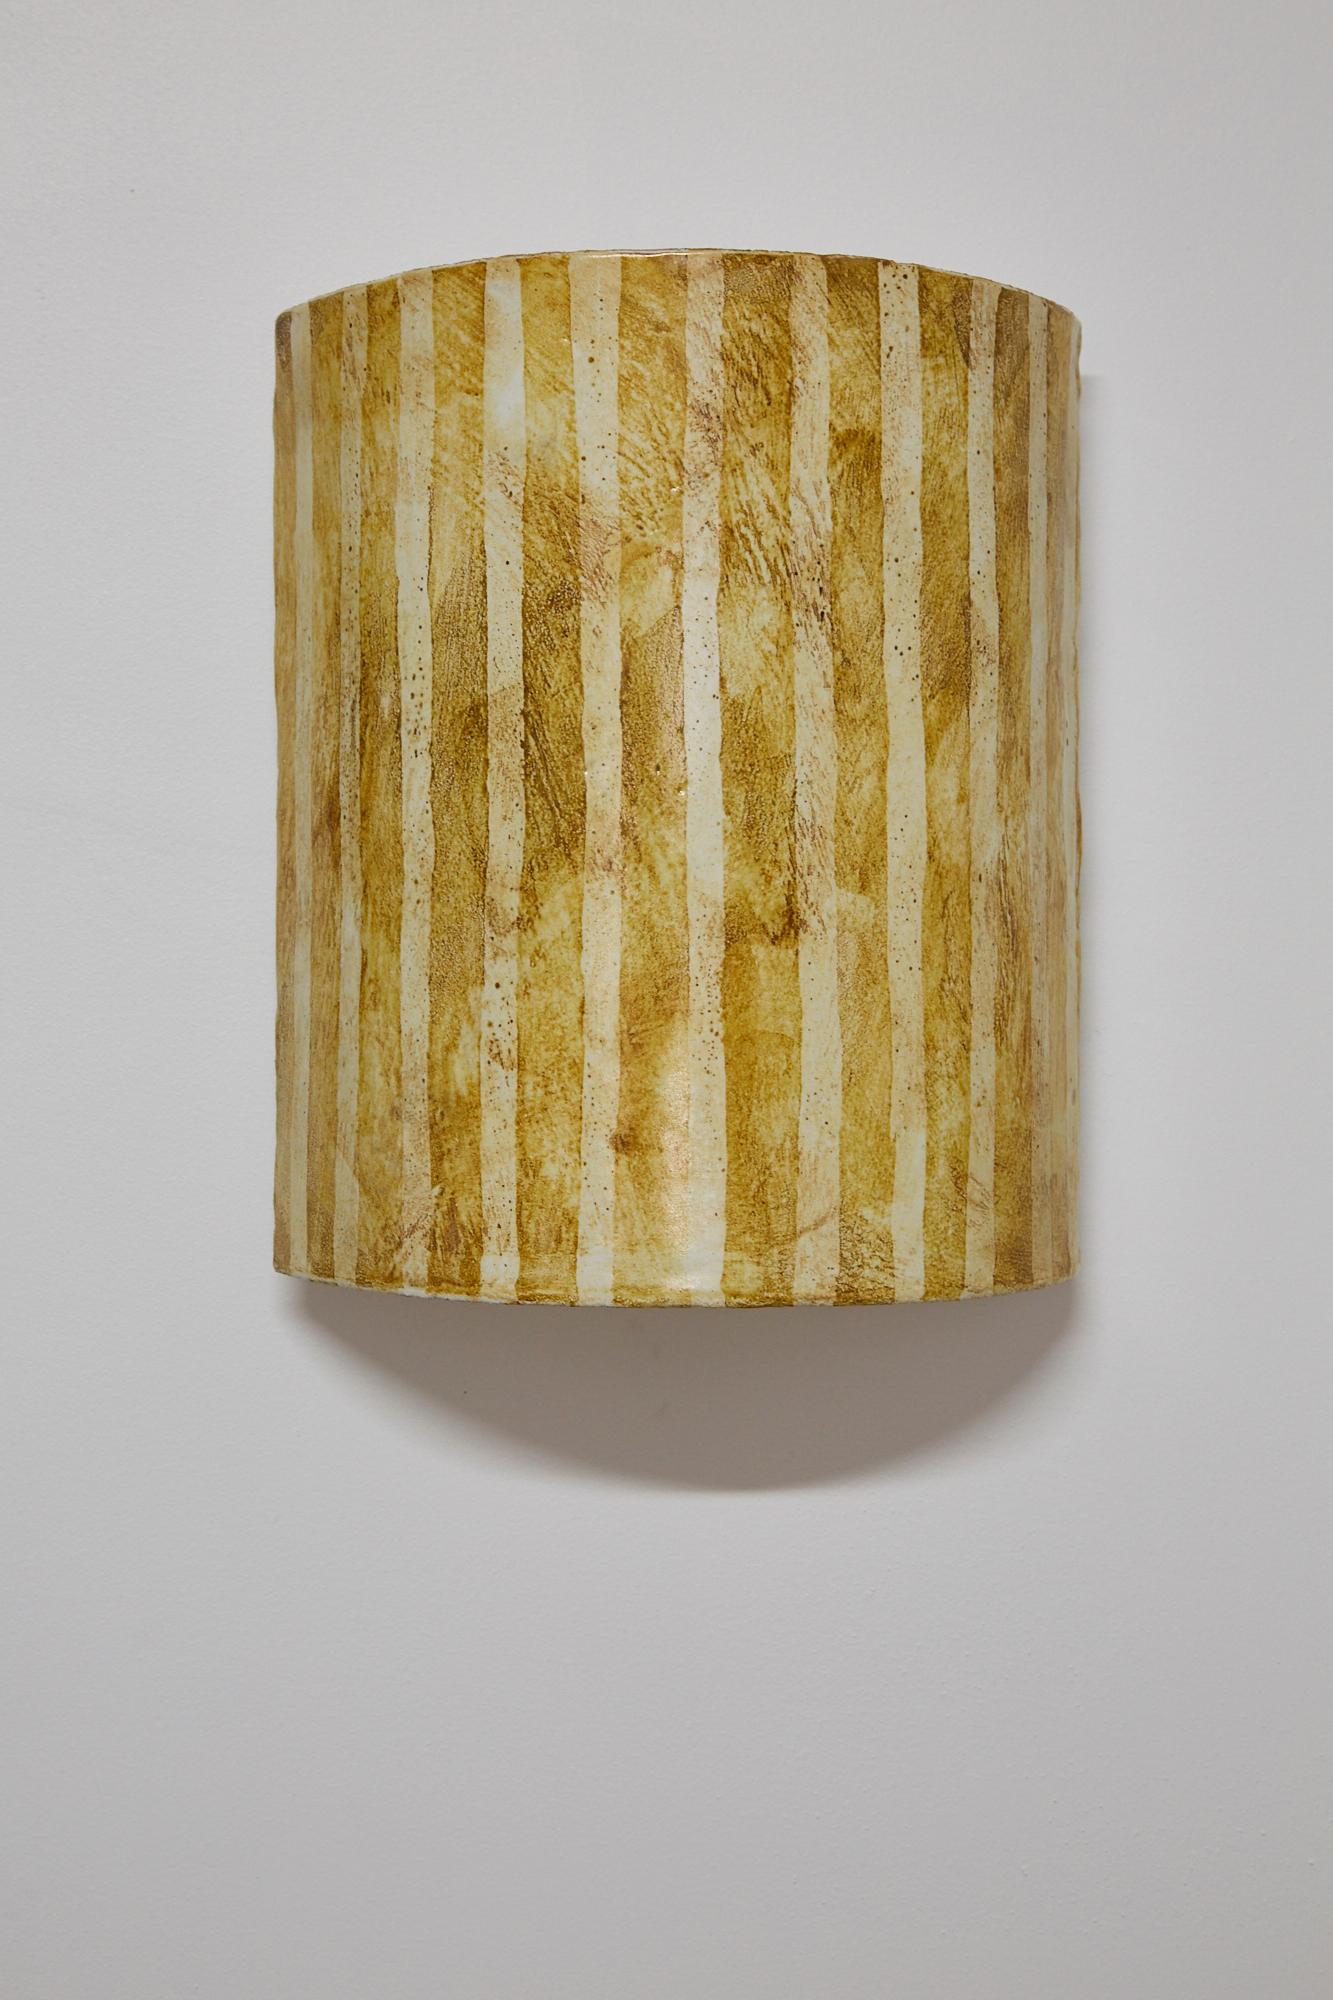 Gently curved ceramic wall sconce cover (no integrated light source) with hand-painted striped finish.